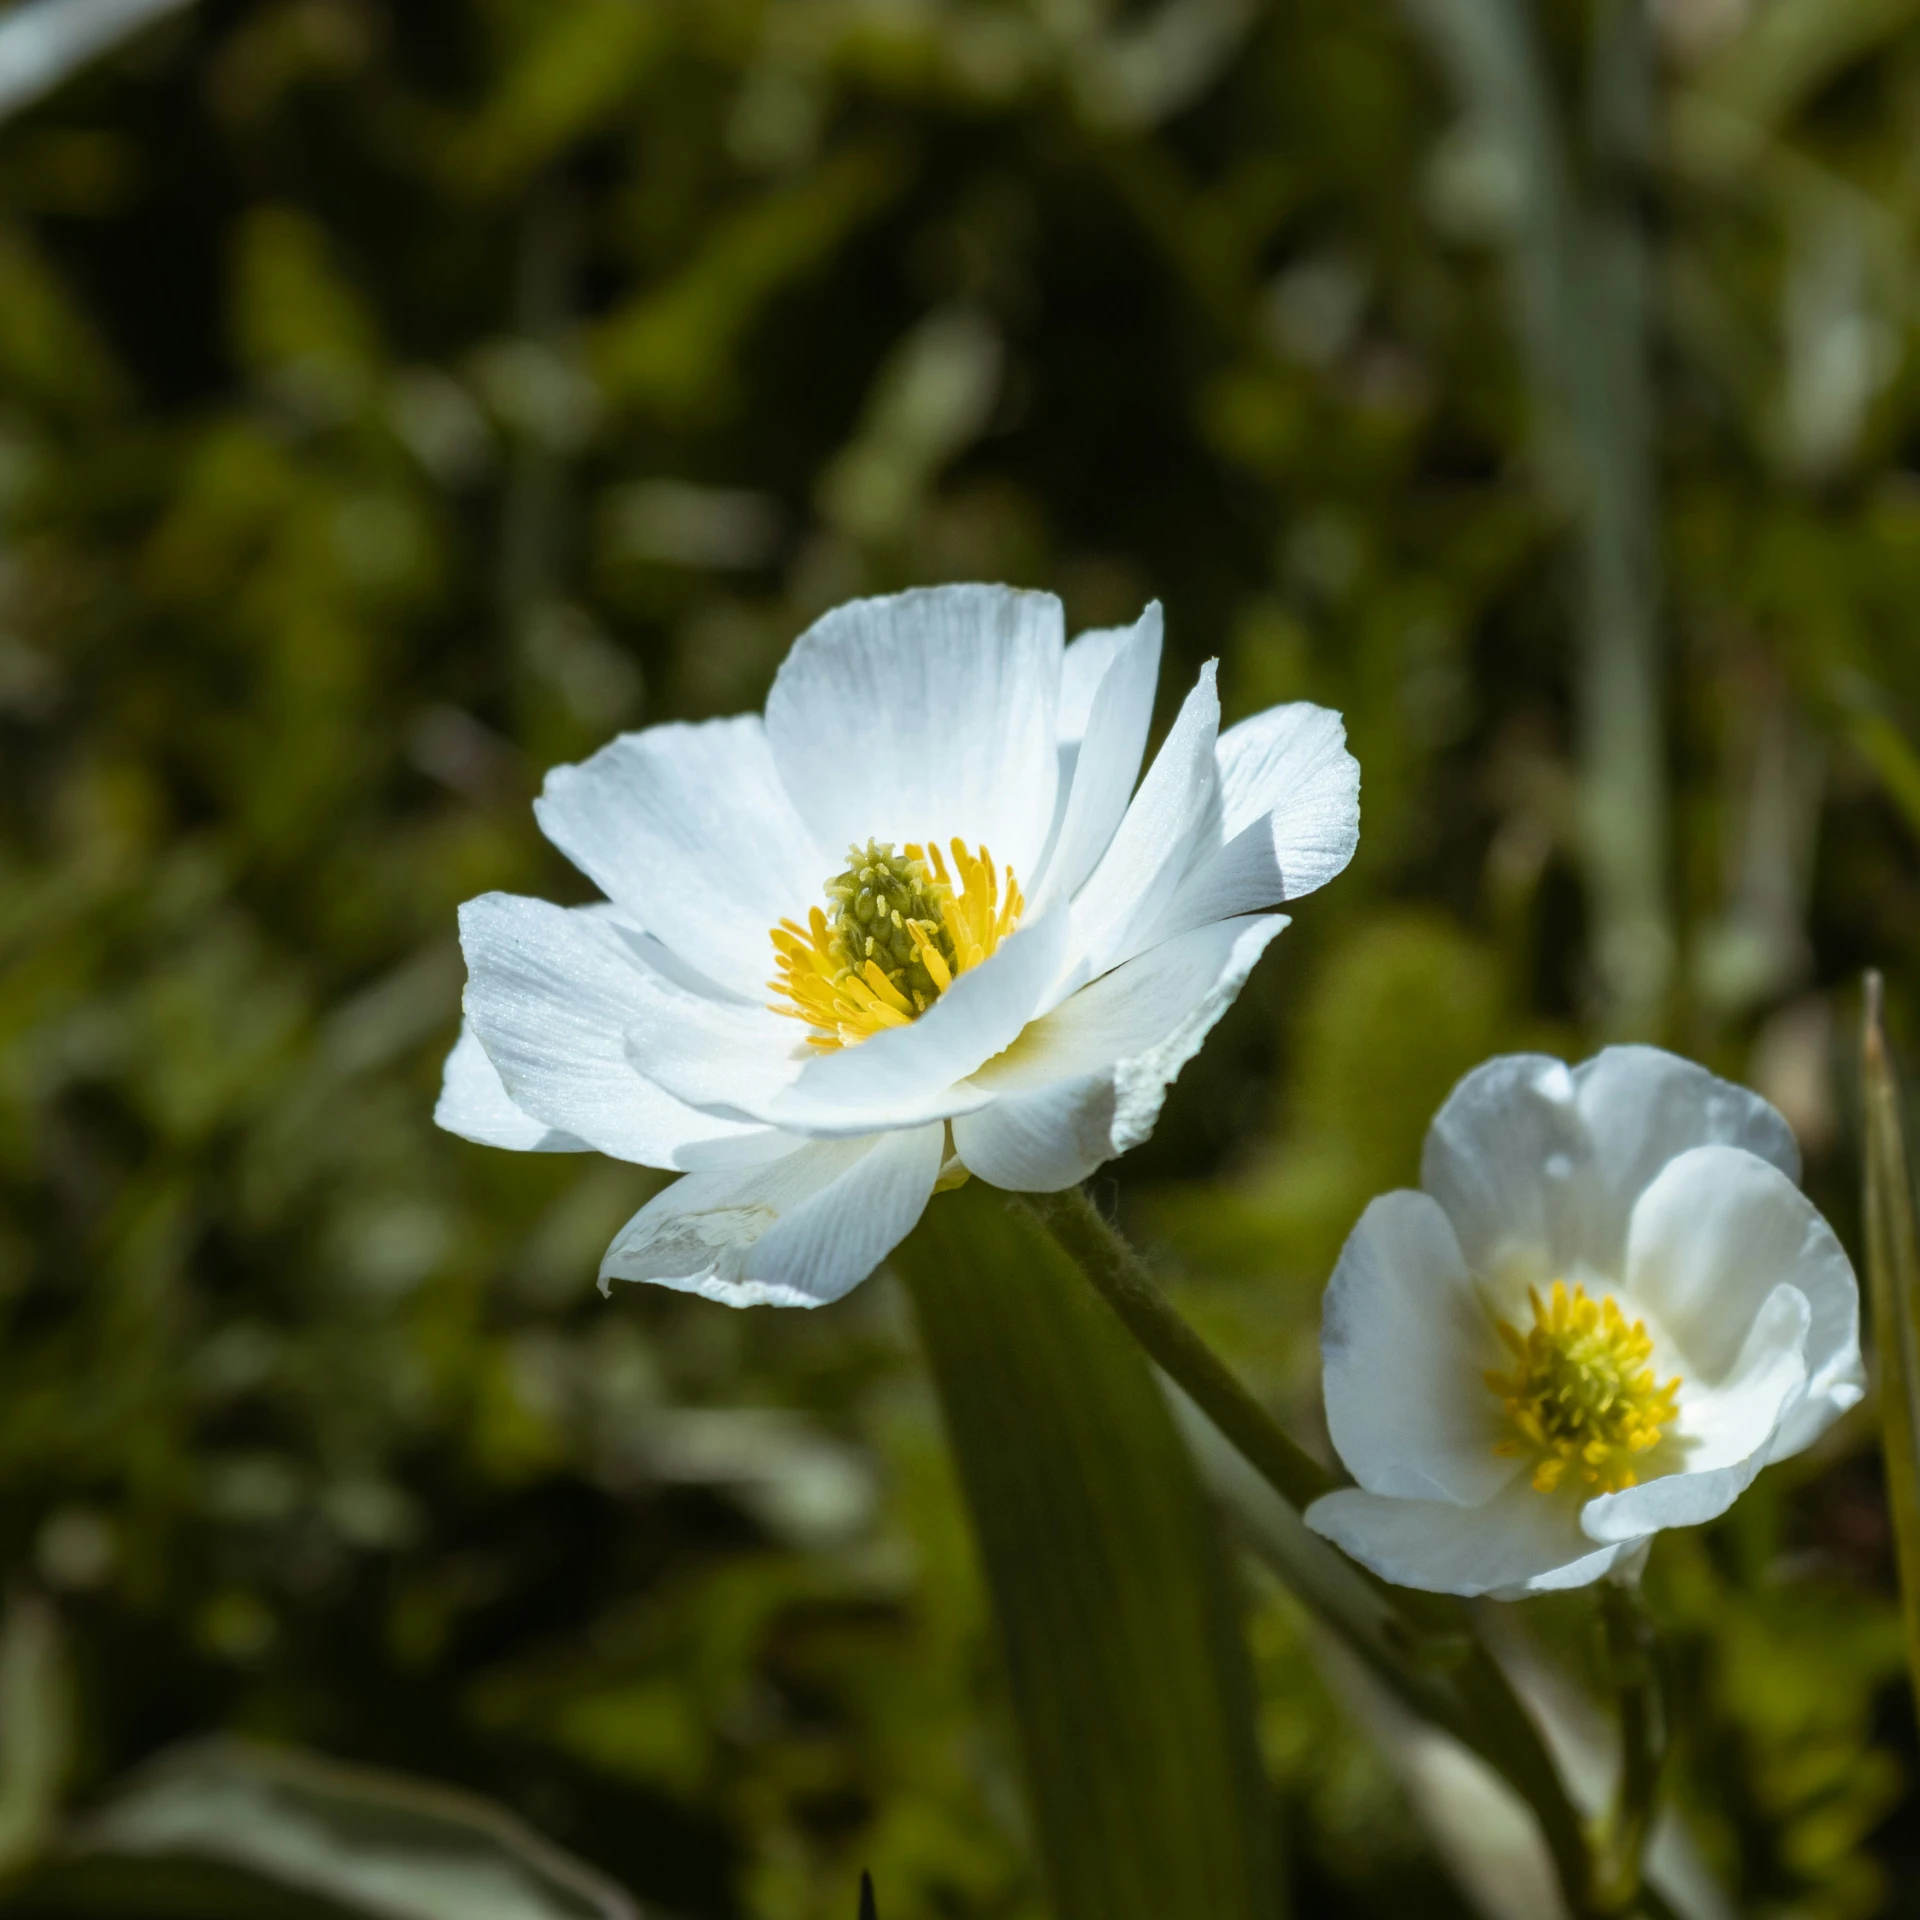 two white flowers with yellow center on grassy area